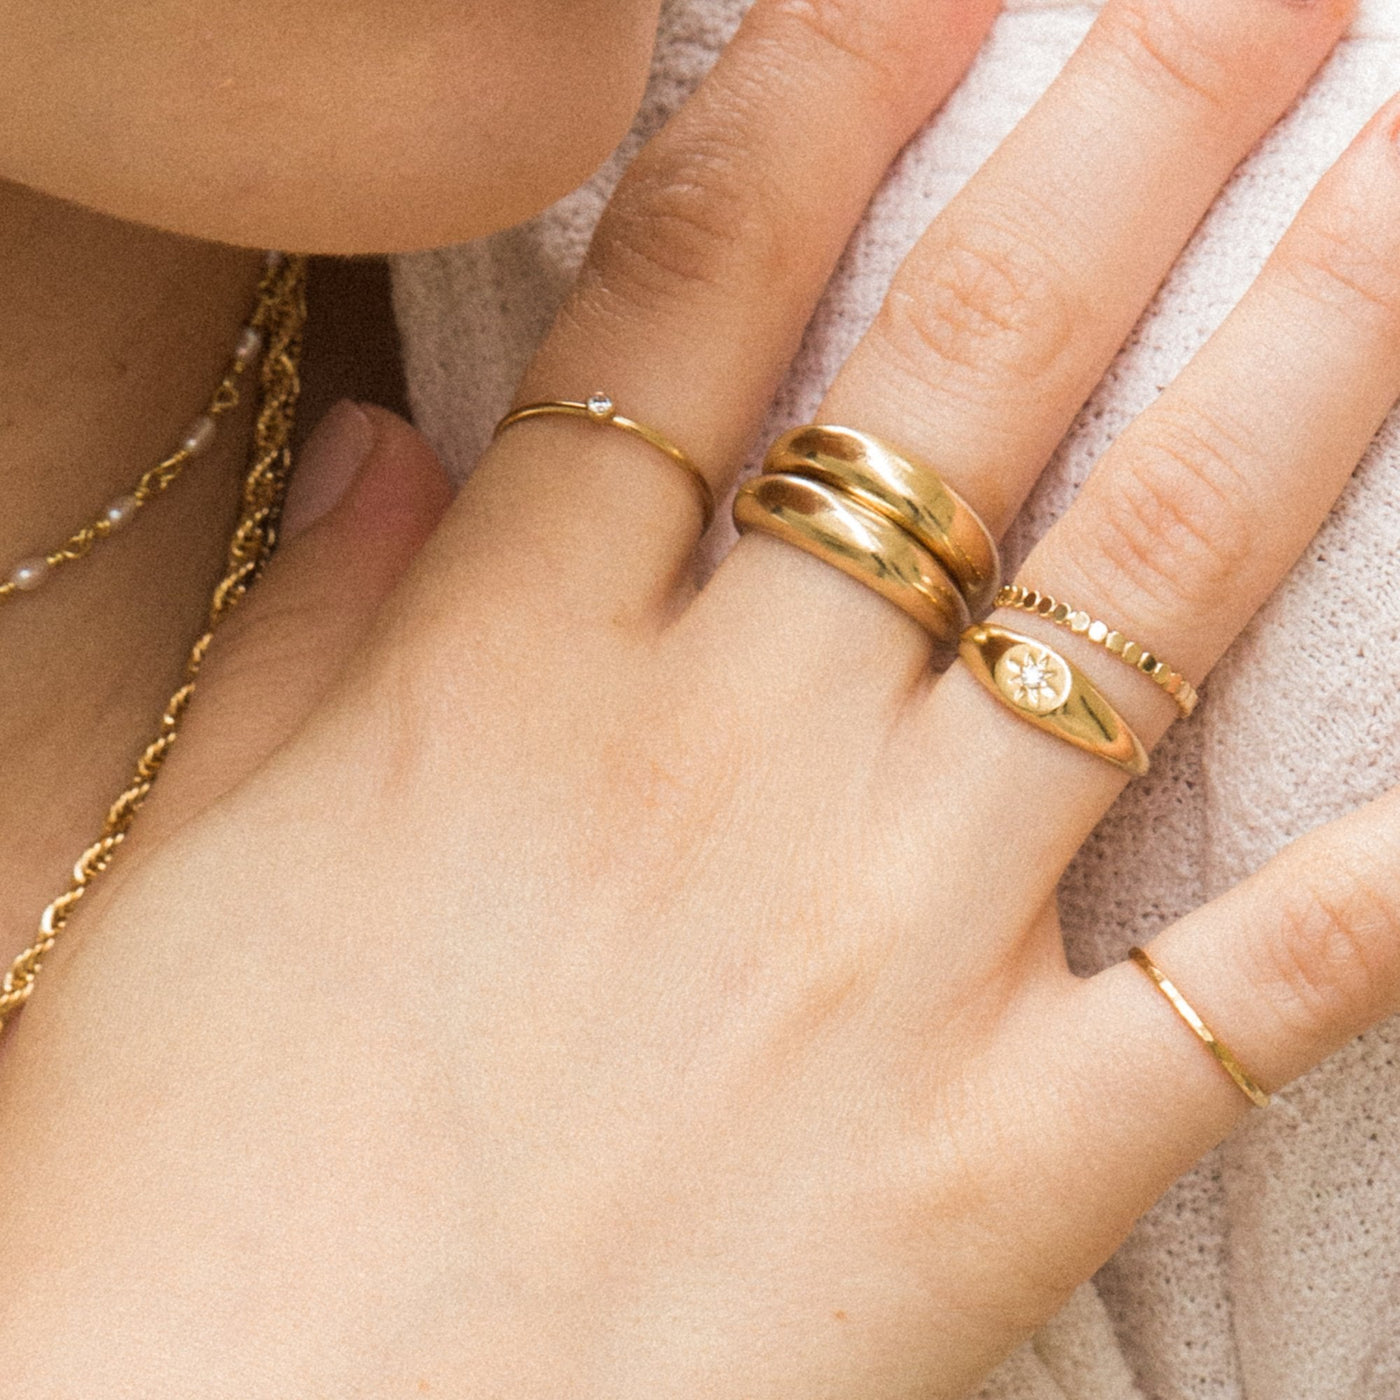 Hammered Stacking Ring by Simple & Dainty Jewelry